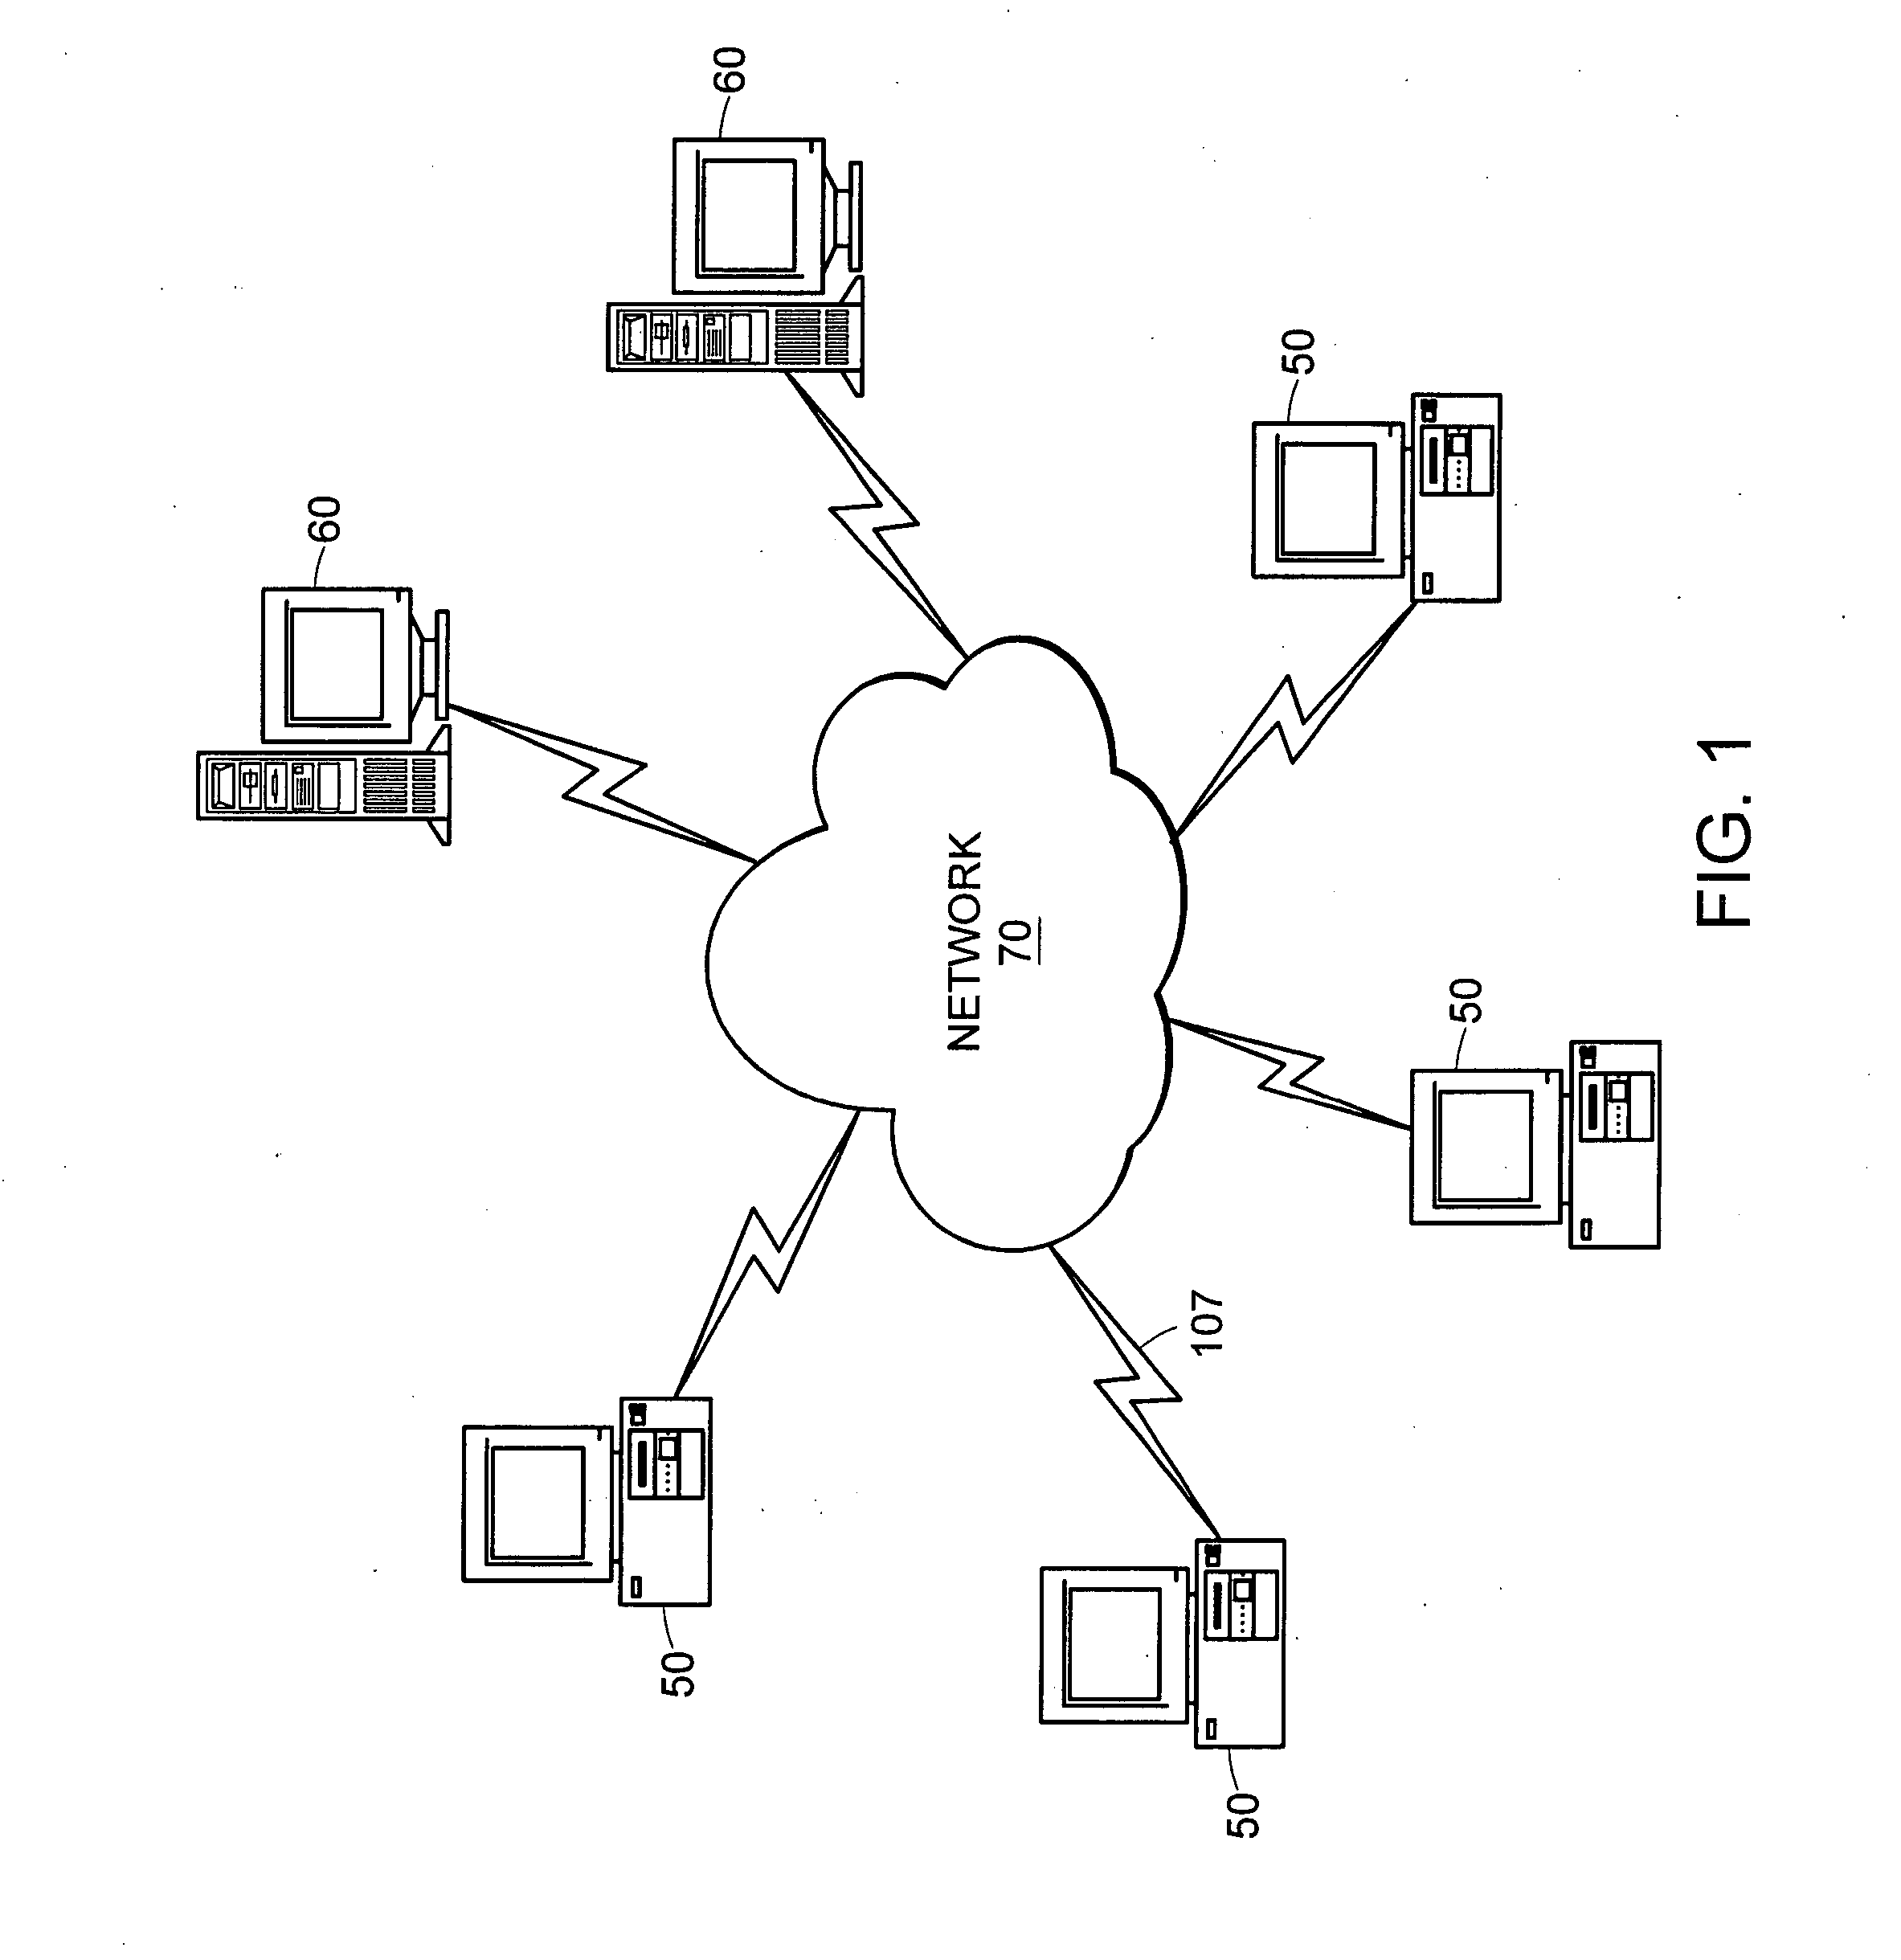 Content-based synchronization method and system for data streams